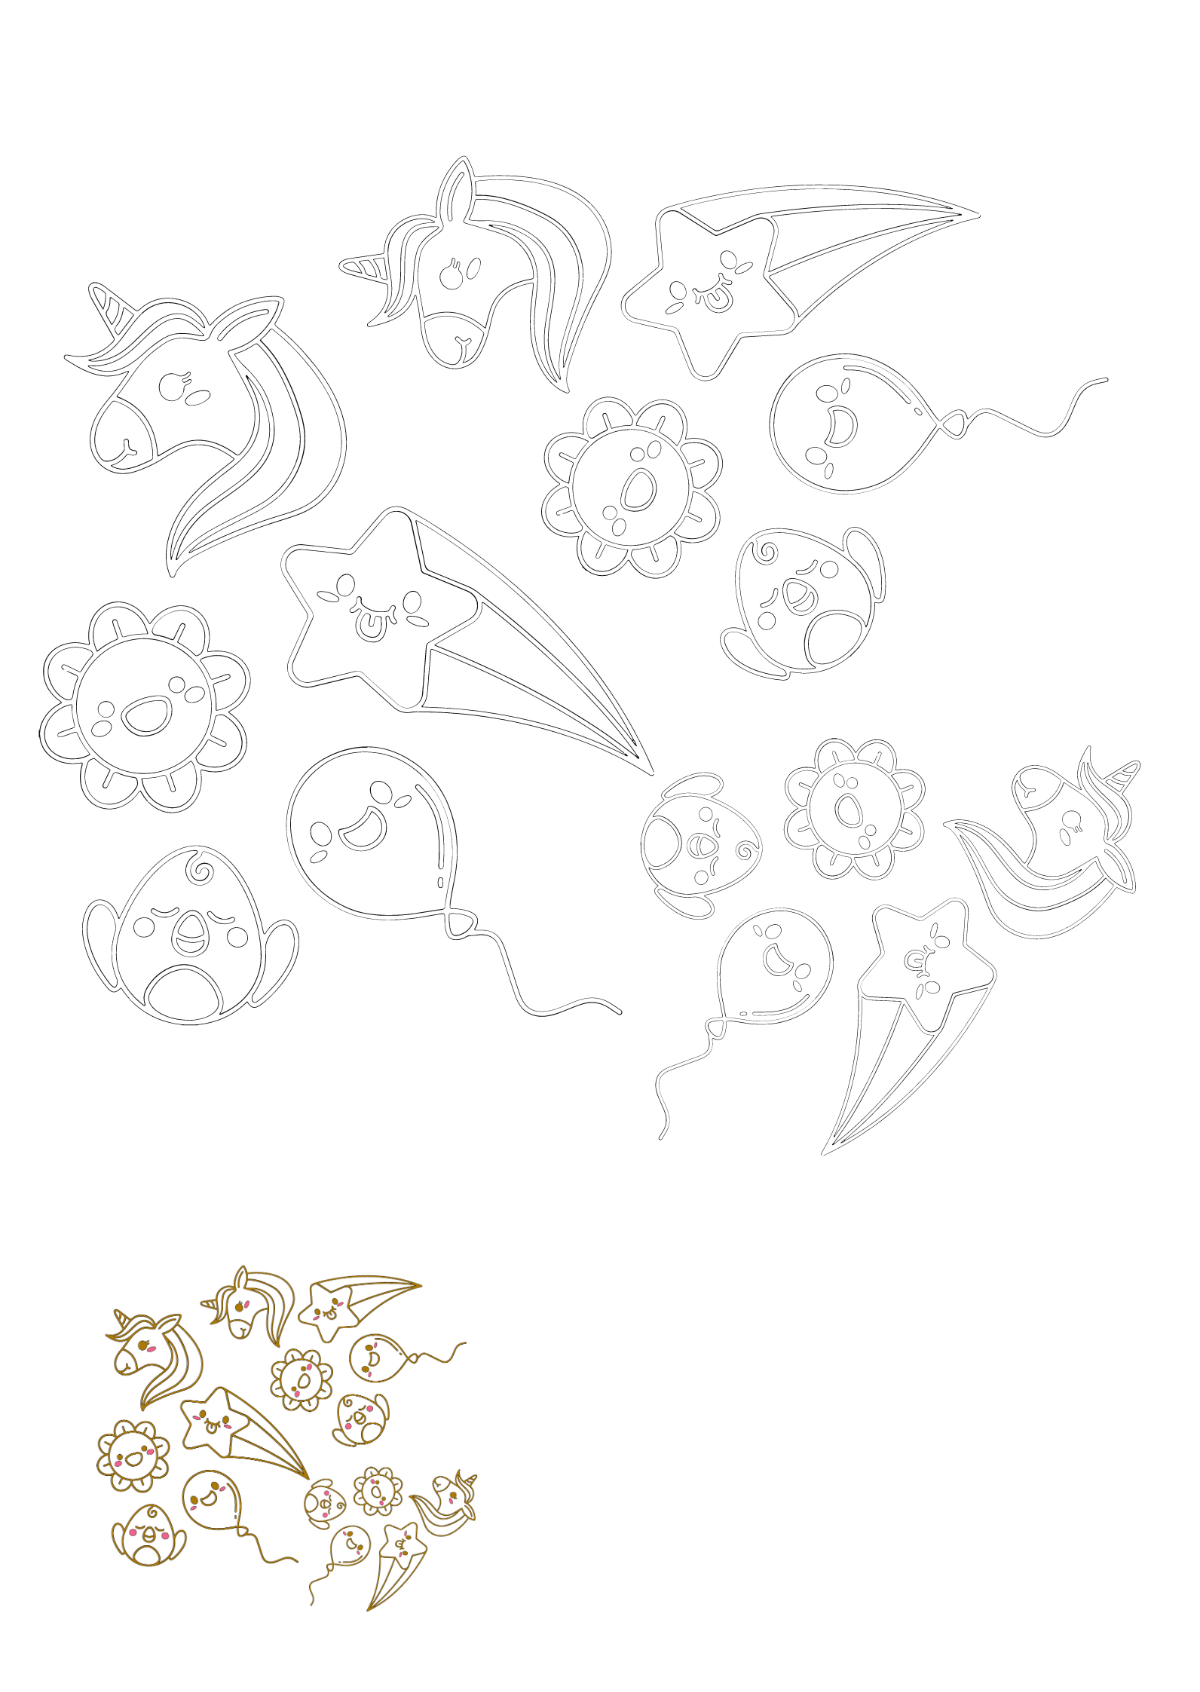 Cute Doodle Coloring Page Template